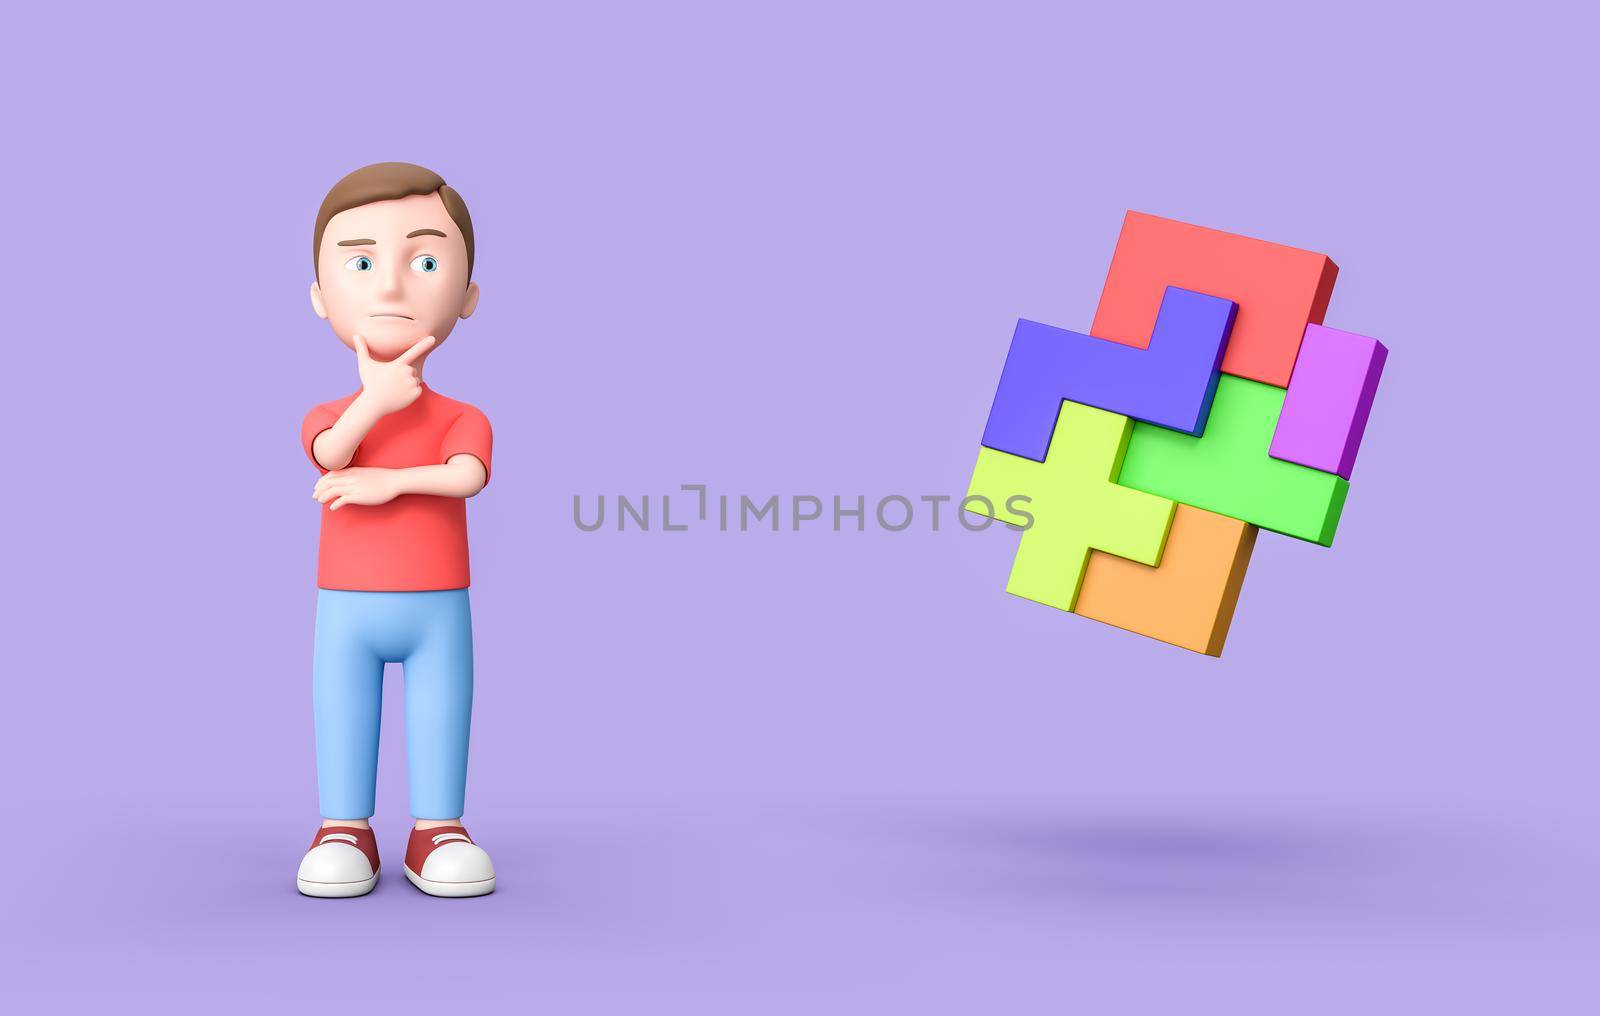 Young 3D Cartoon Character and Blocks Combined on Purple Background by make